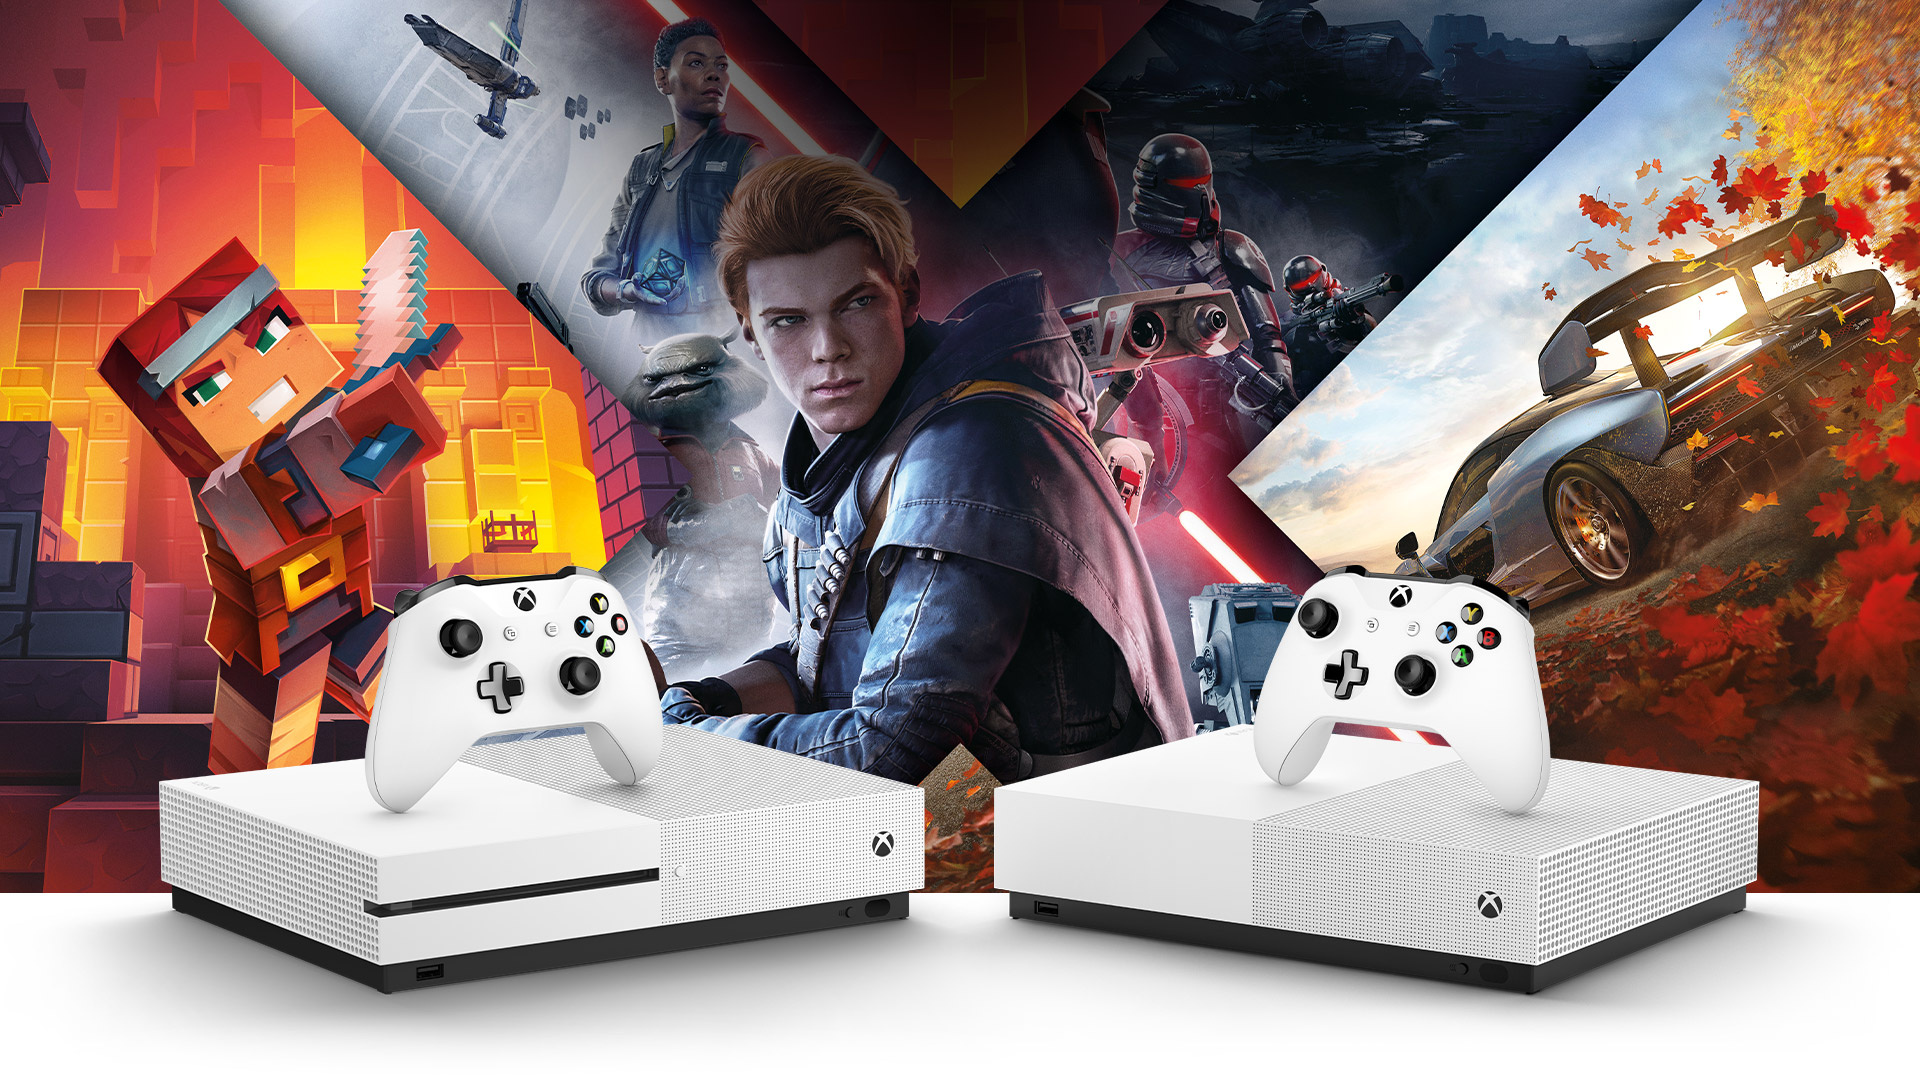 Xbox: A slick looking game console that's 40 percent smaller than the original, S series. 1920x1080 Full HD Background.